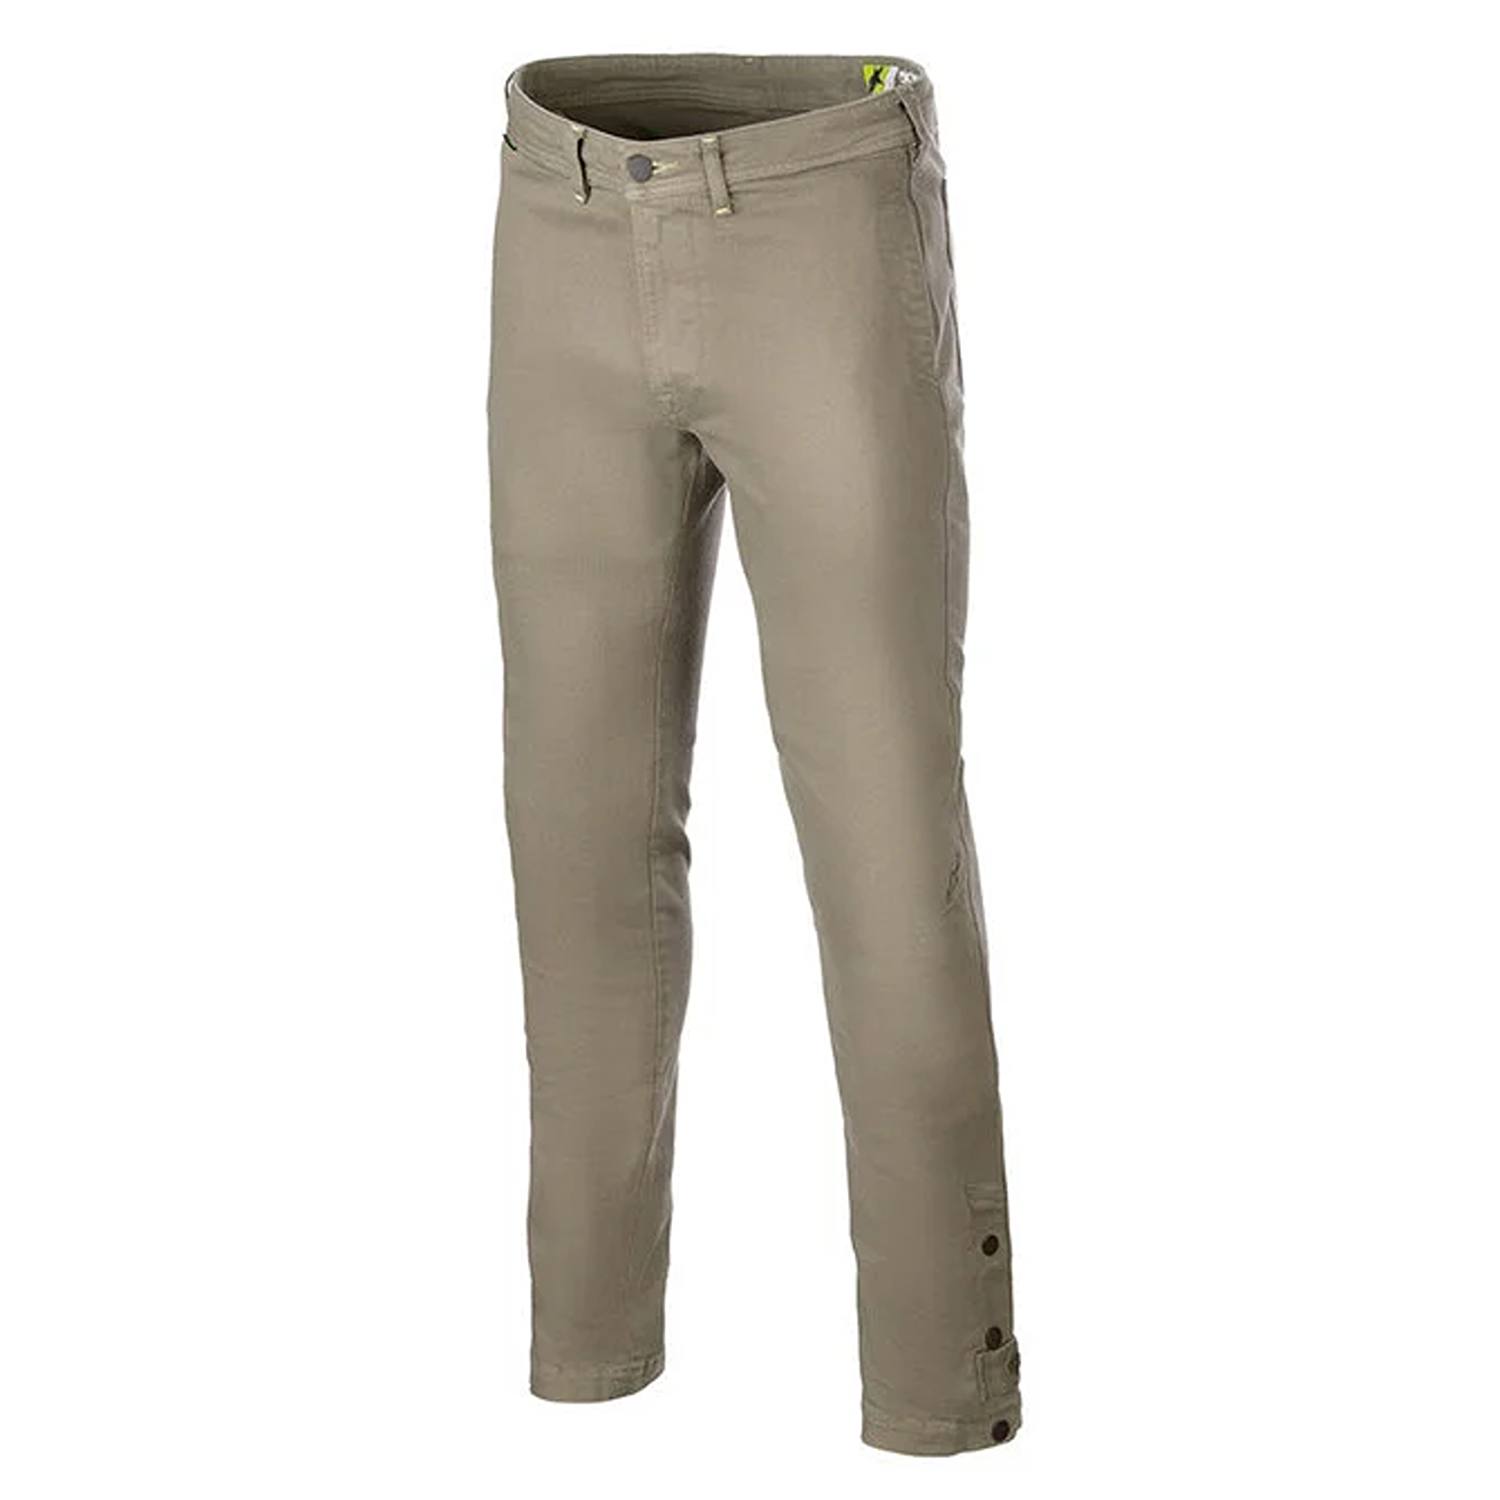 Image of Alpinestars Stratos Regular Fit Tech Riding Pants Military Green Taille 30